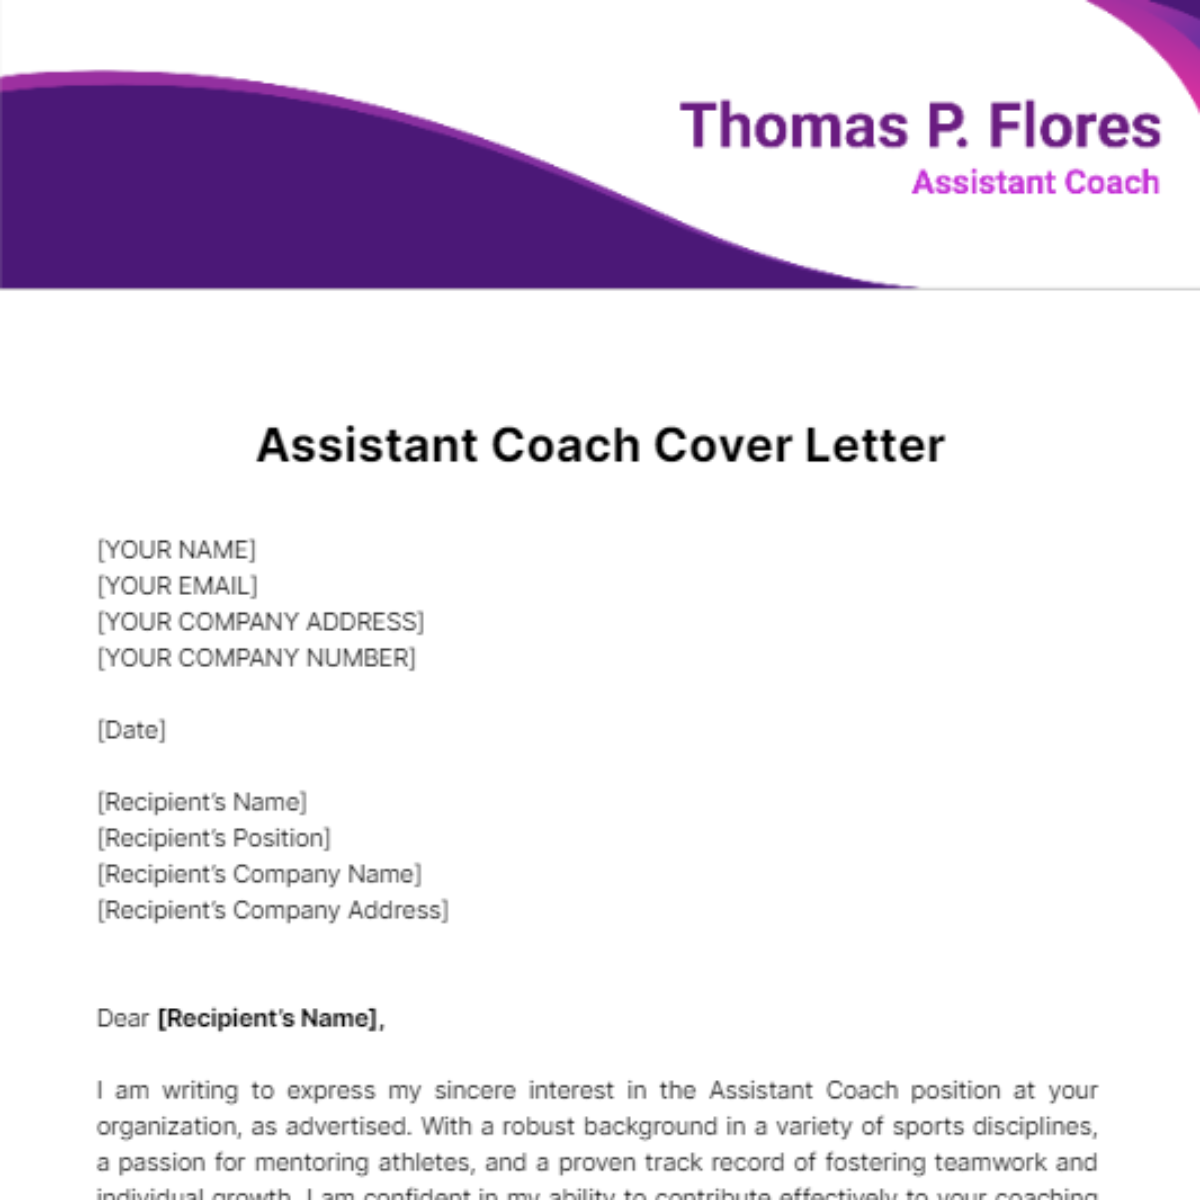 Assistant Coach Cover Letter Template